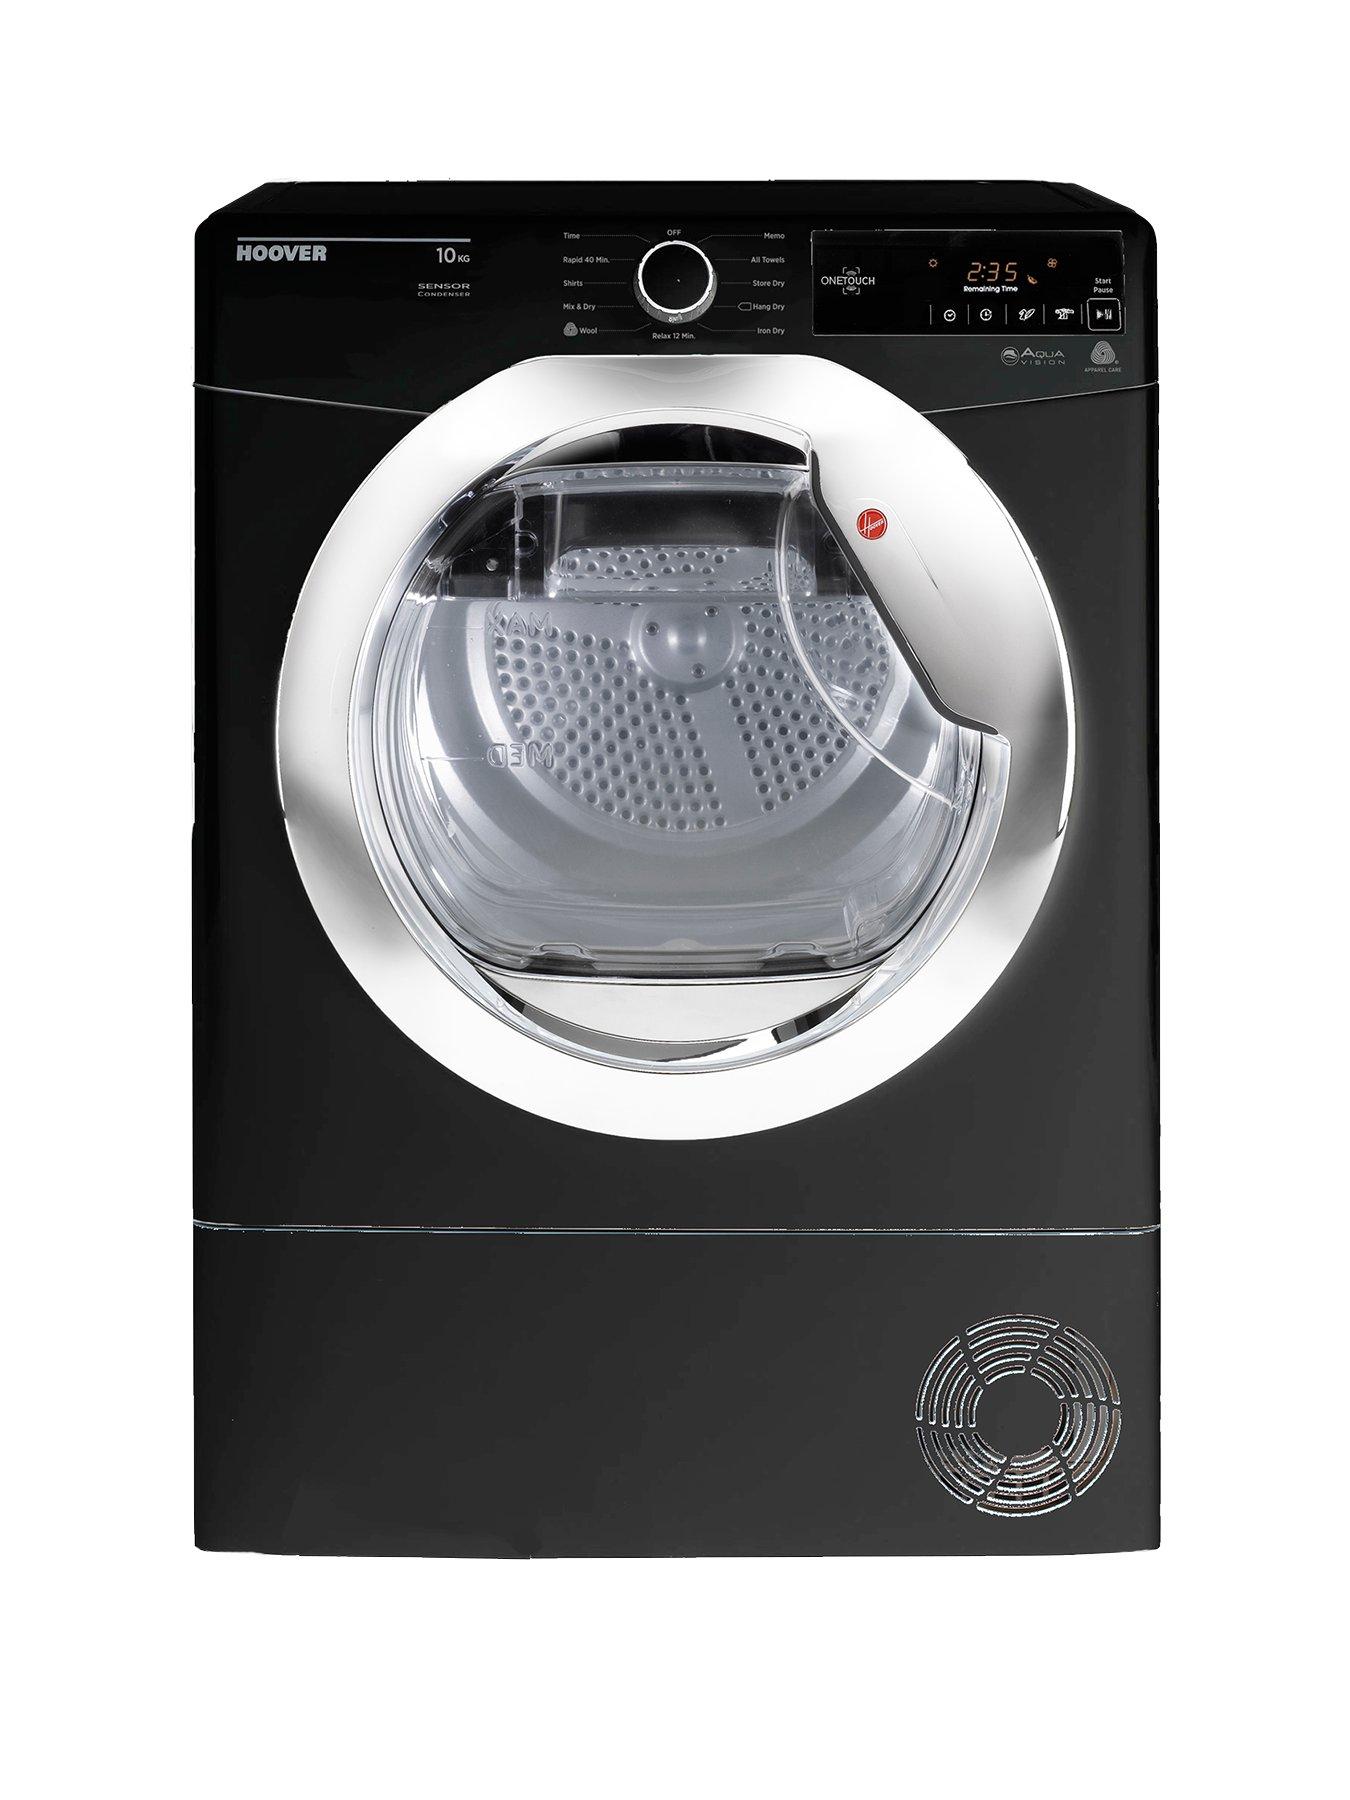 Hoover Dynamic Next Dxc10Tceb 10Kg Aquavision Condenser Tumble Dryer With One Touch – Black/Chrome